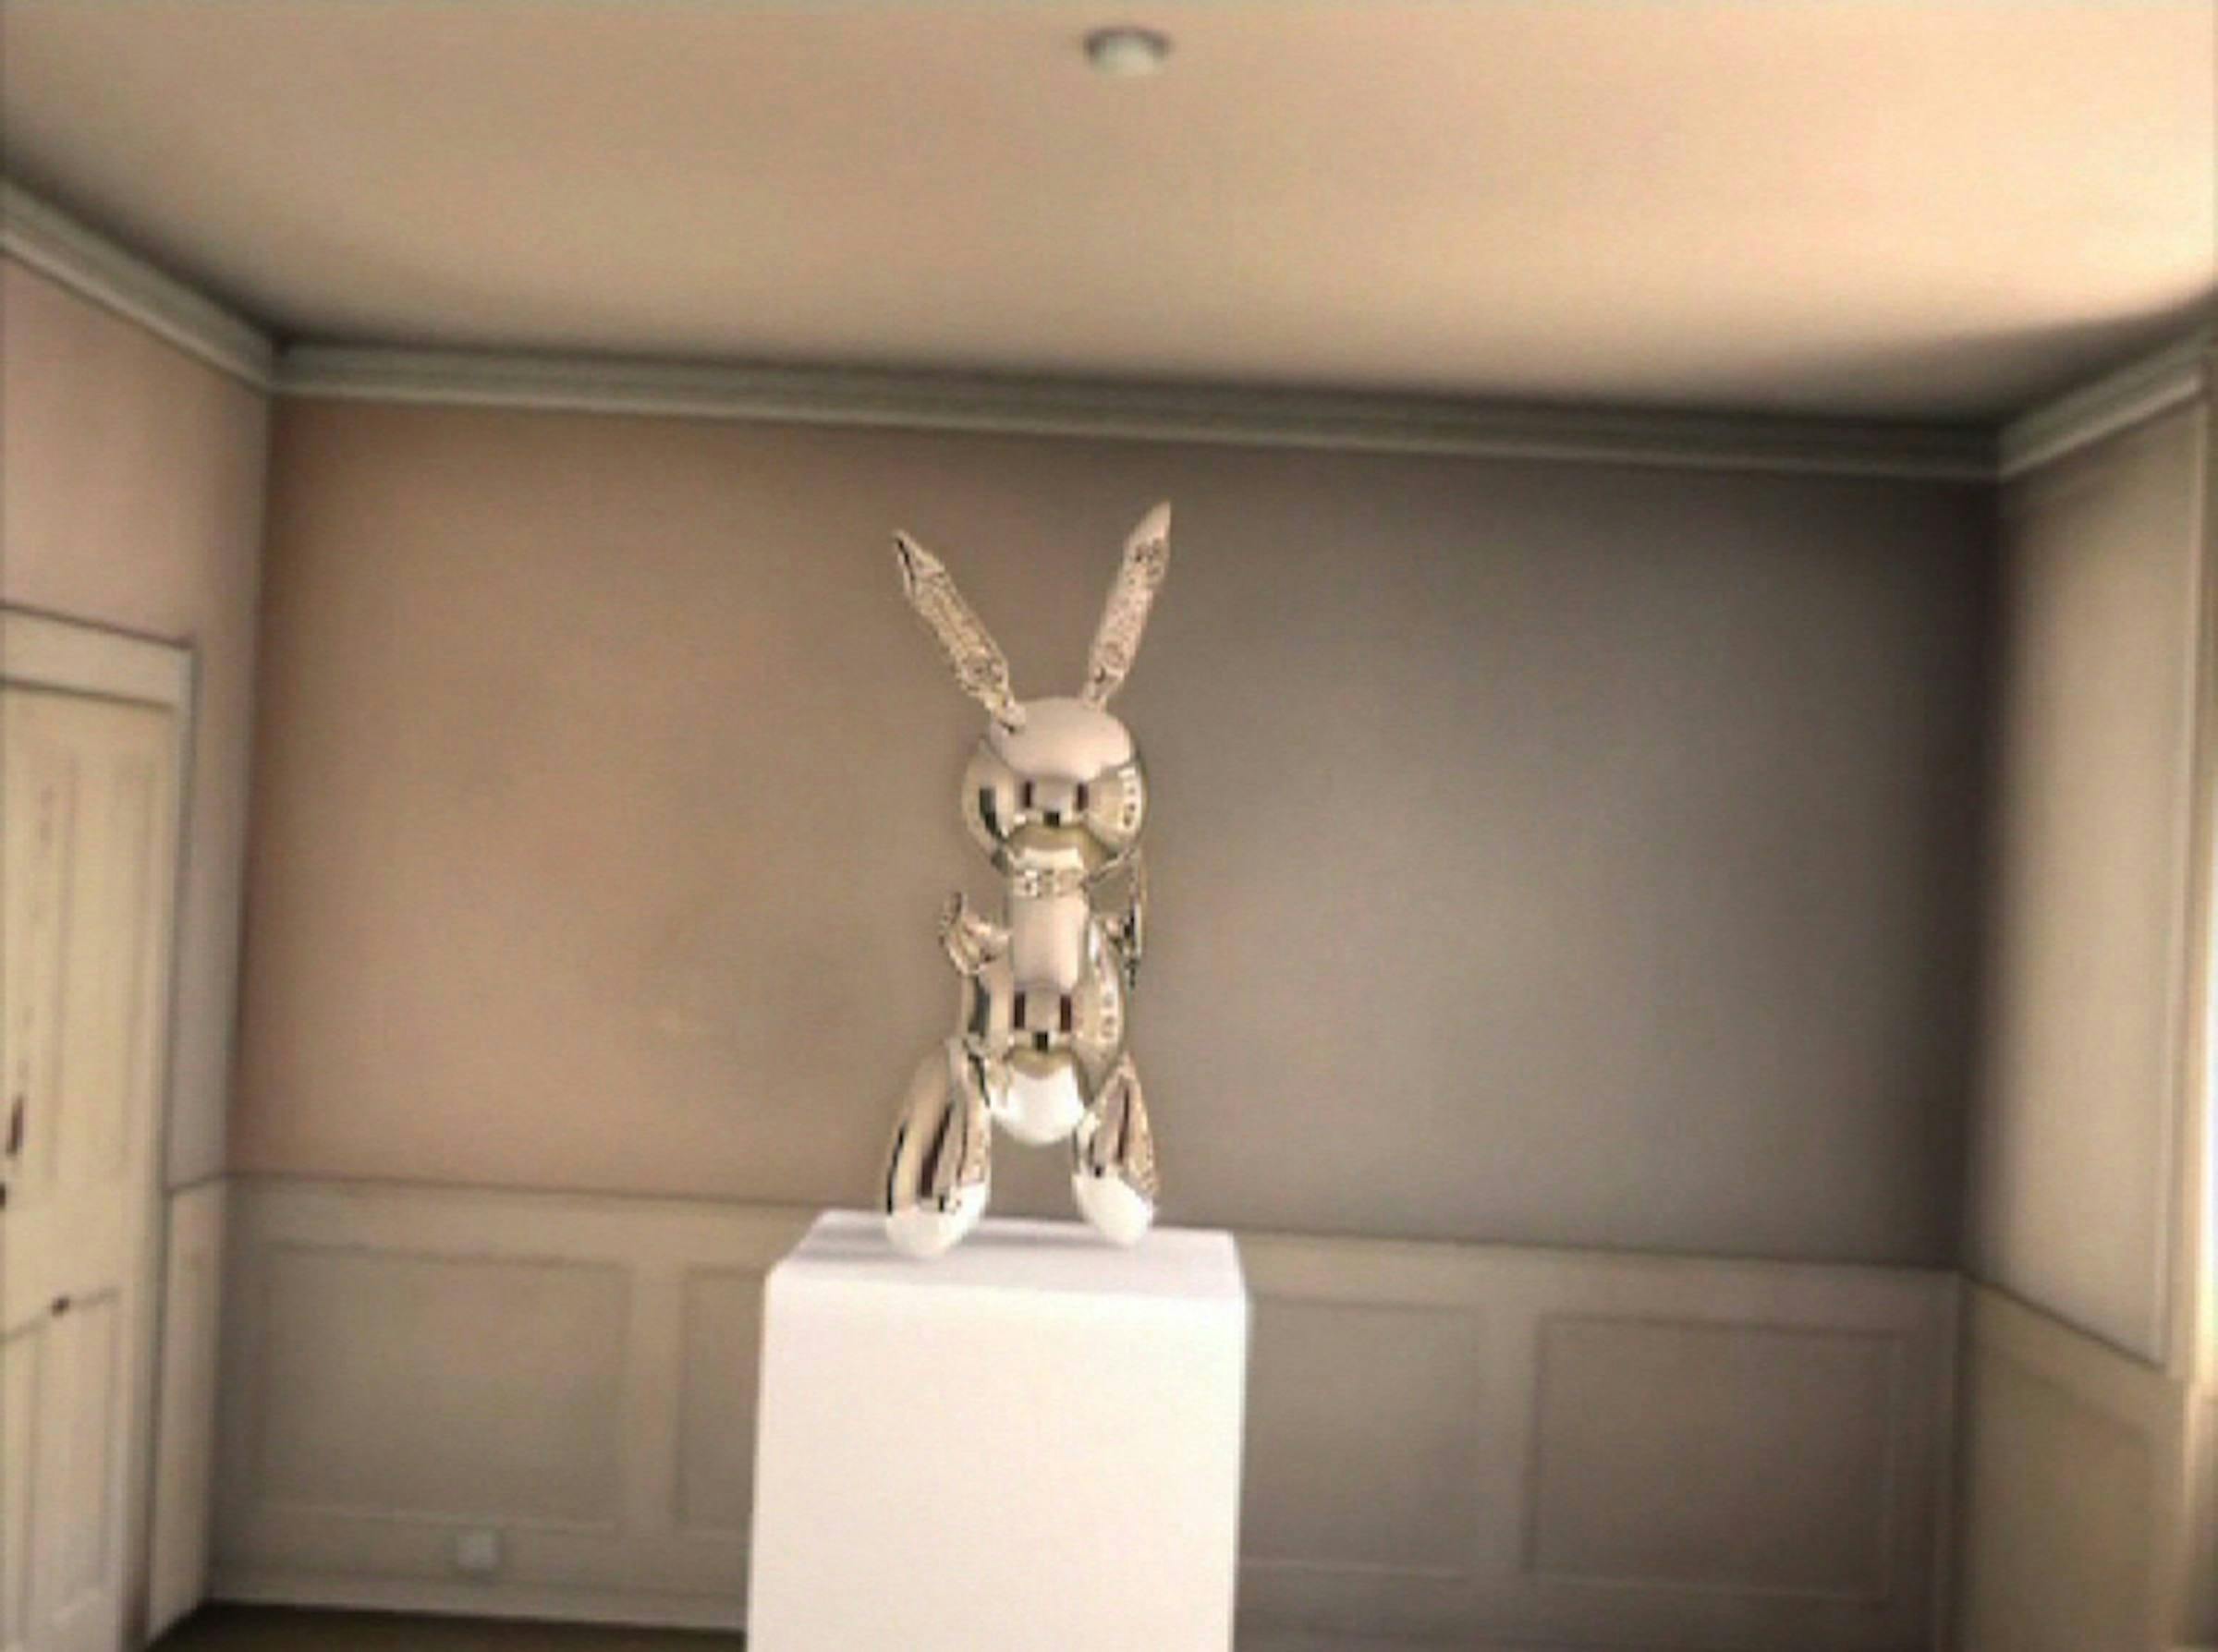 a digitally rendered image of a stainless steel Jeff Koons' rabbit on top of a plinth in a domestic room. You cannot see reflections of the camera in the stainless steel surface of the rabbit